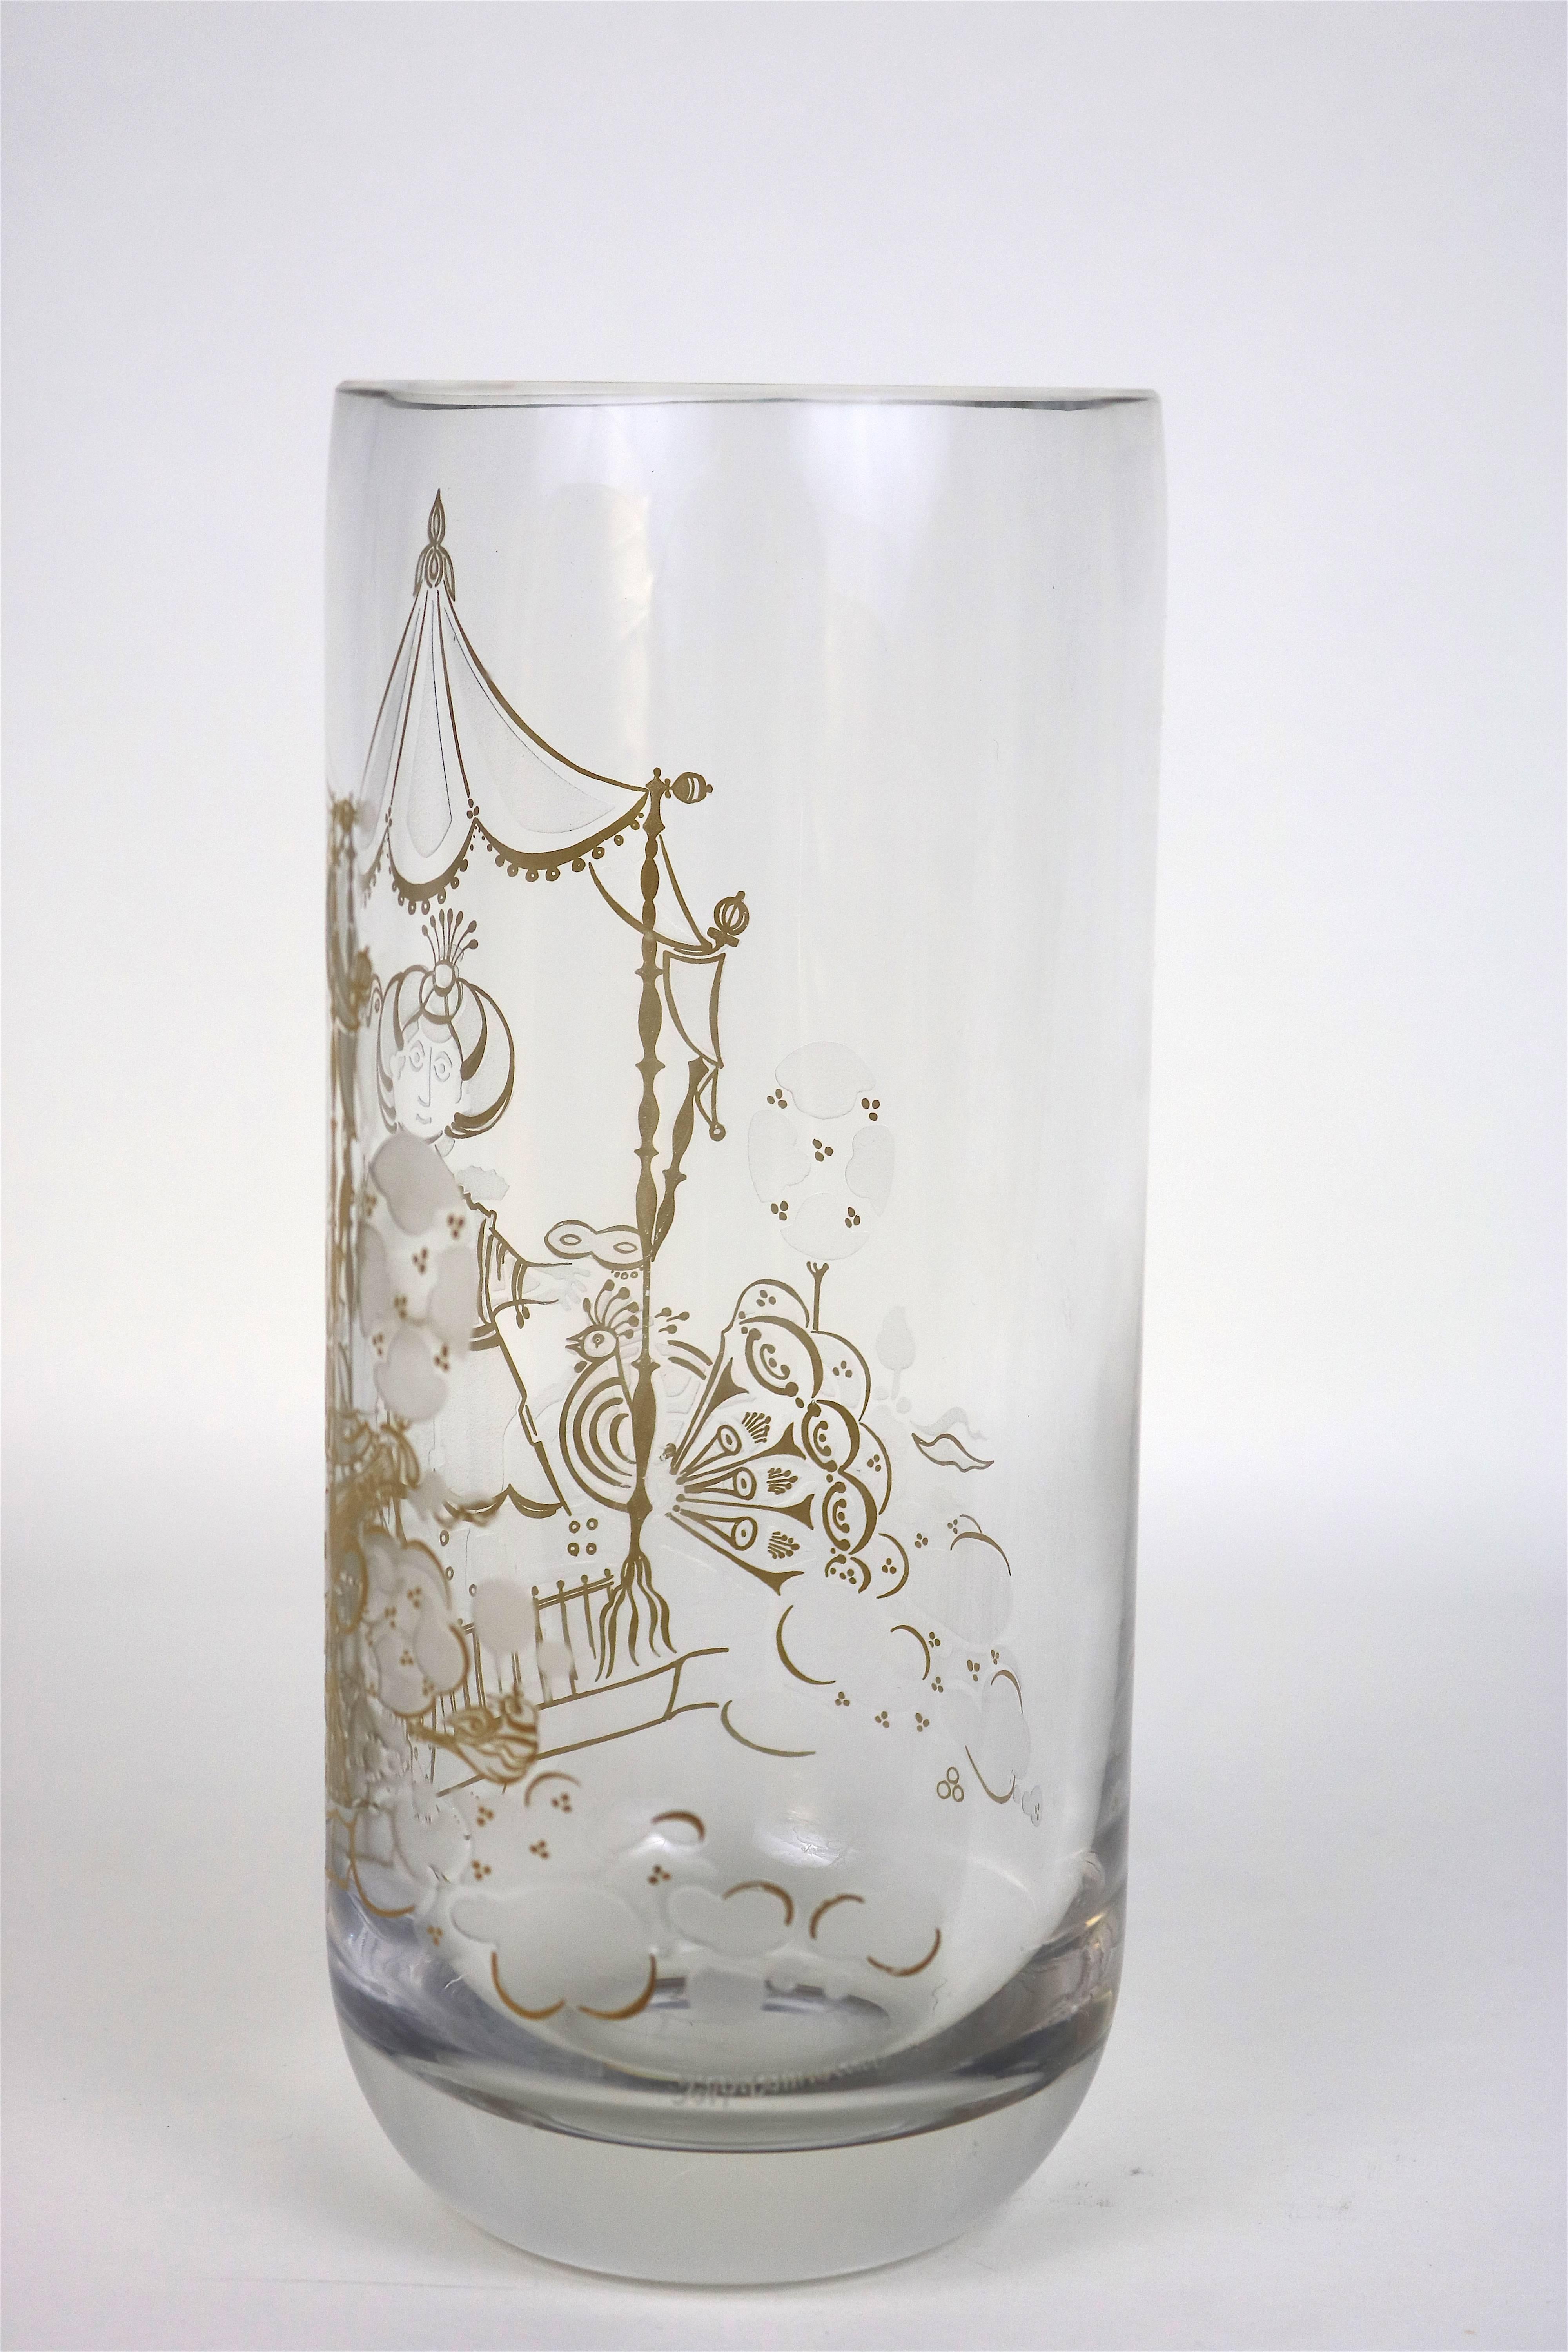 Bjorn Wiinblad Crystal Vase 22K etched Gold Charming Design- signed In Excellent Condition For Sale In West Palm Beach, FL